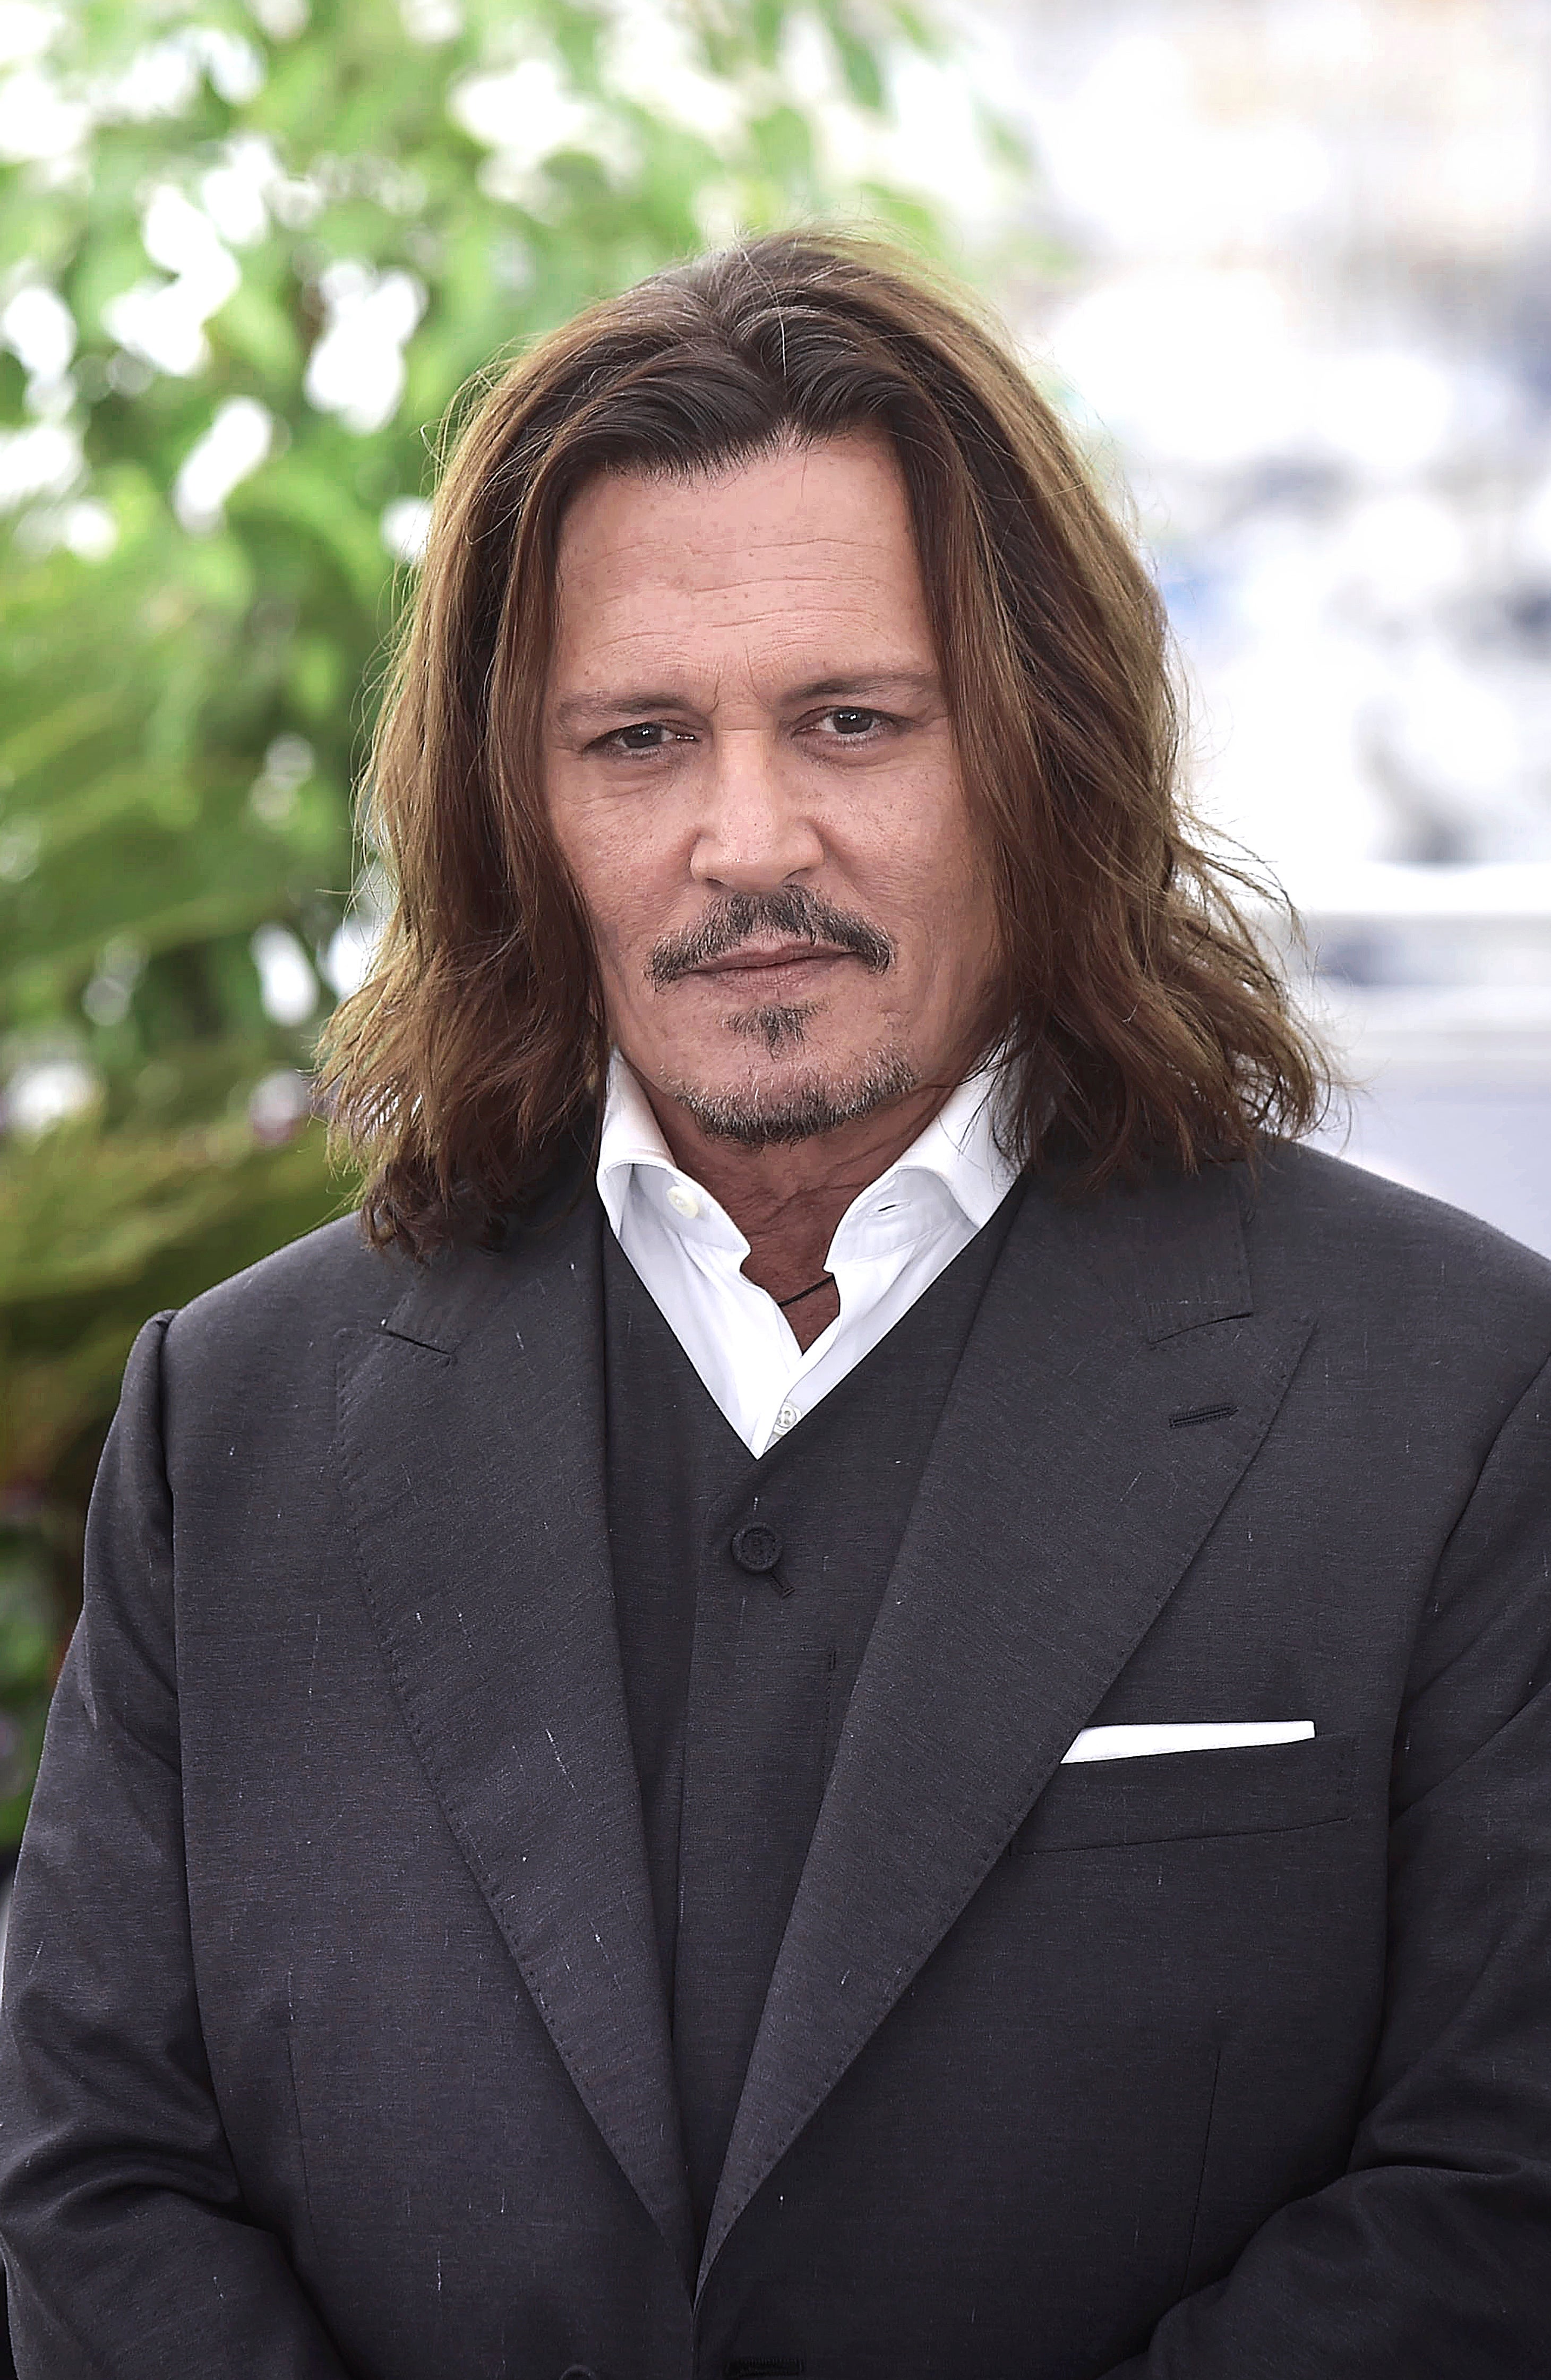 Johnny Depp in a formal black suit at an event